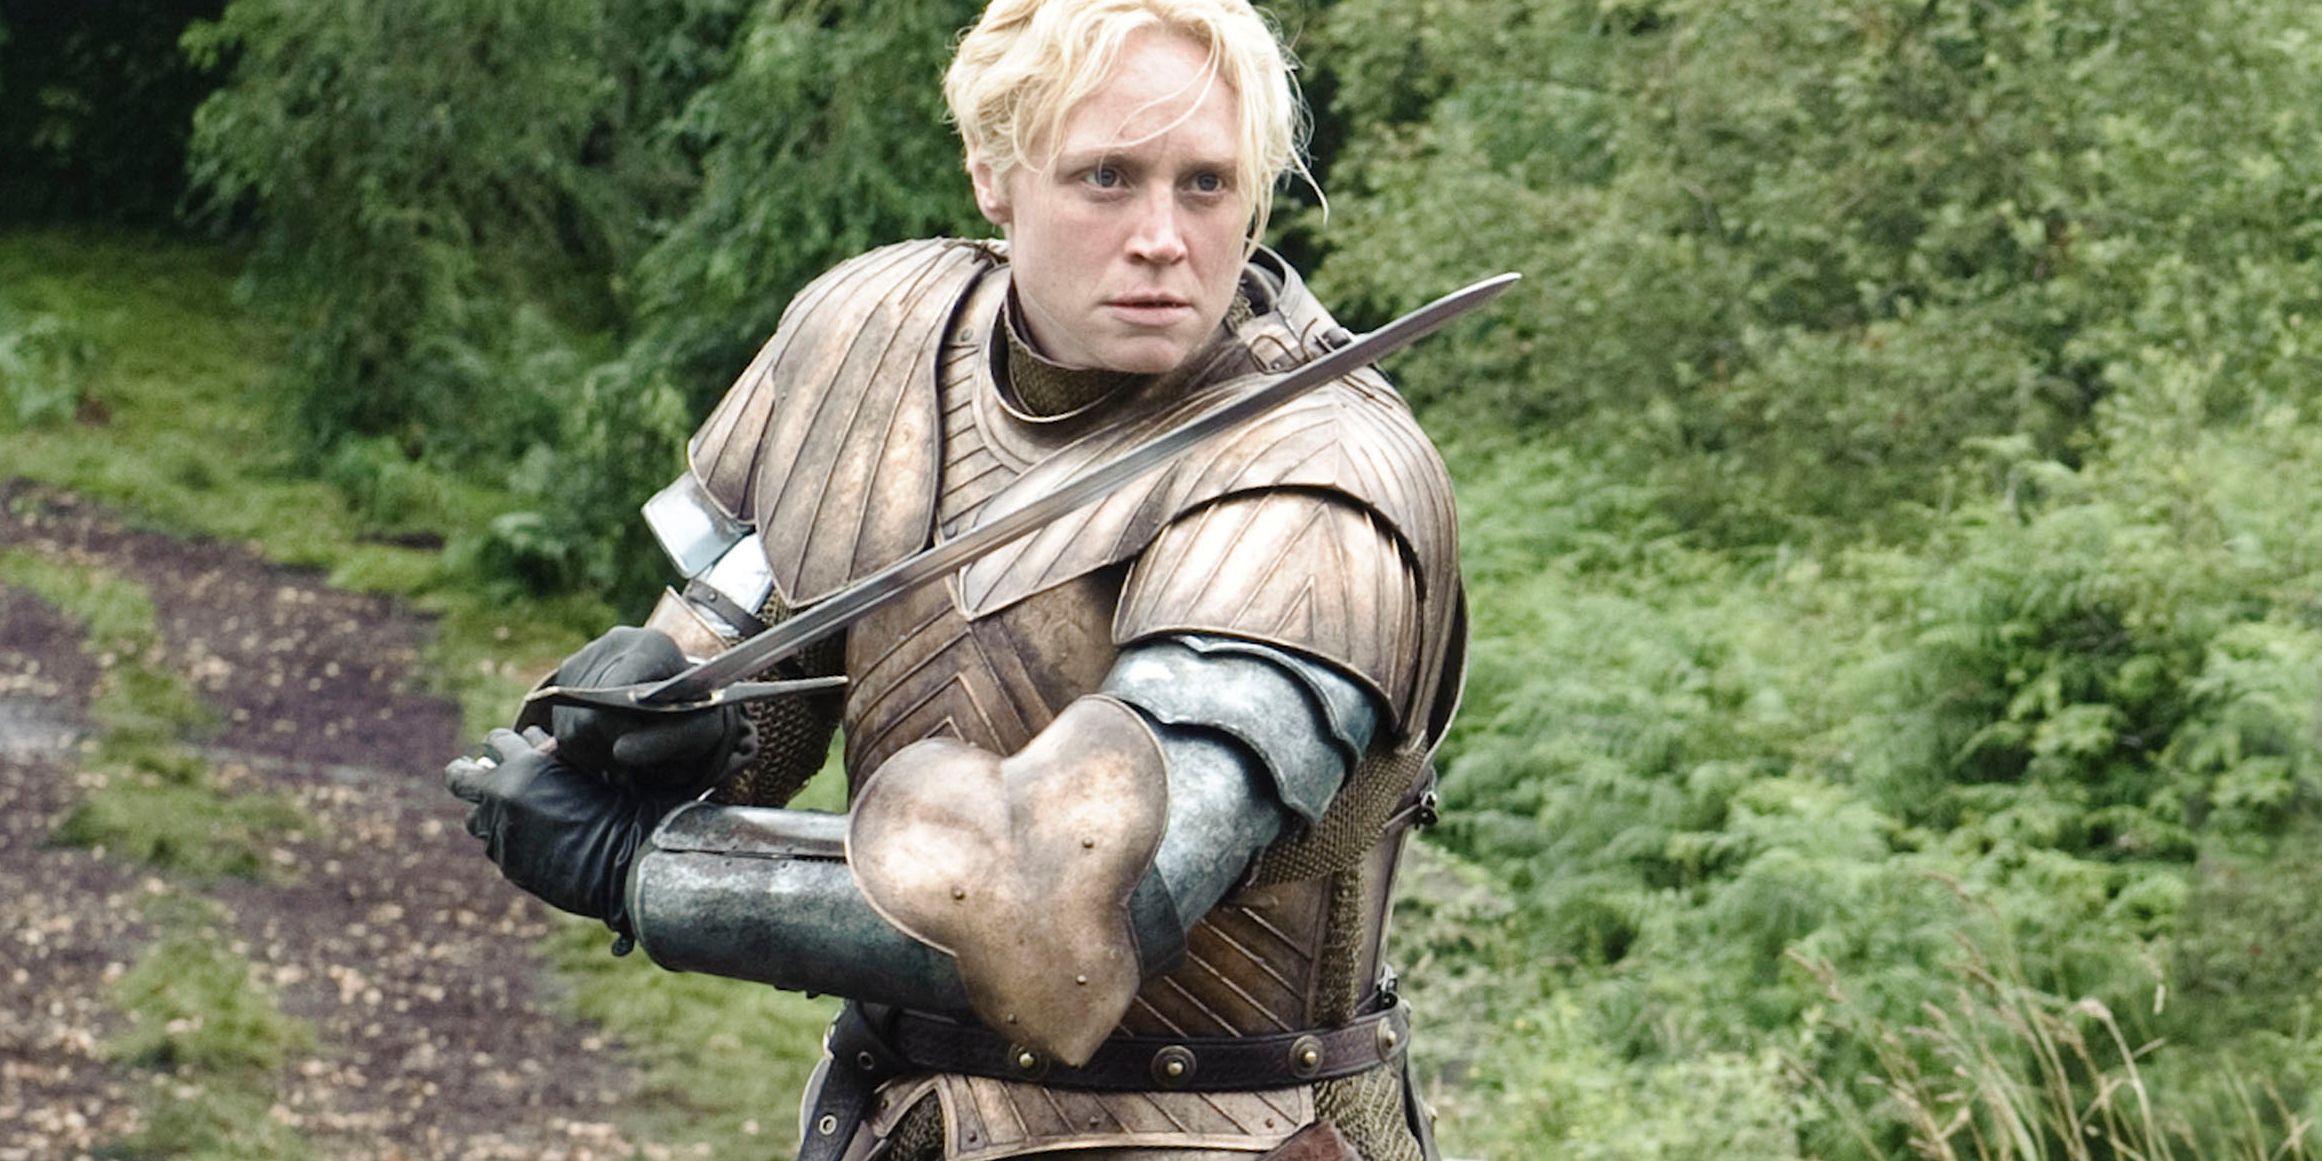 Game Of Thrones 10 Interesting Facts You Didnt Know About Gwendoline Christie (Brienne Of Tarth)